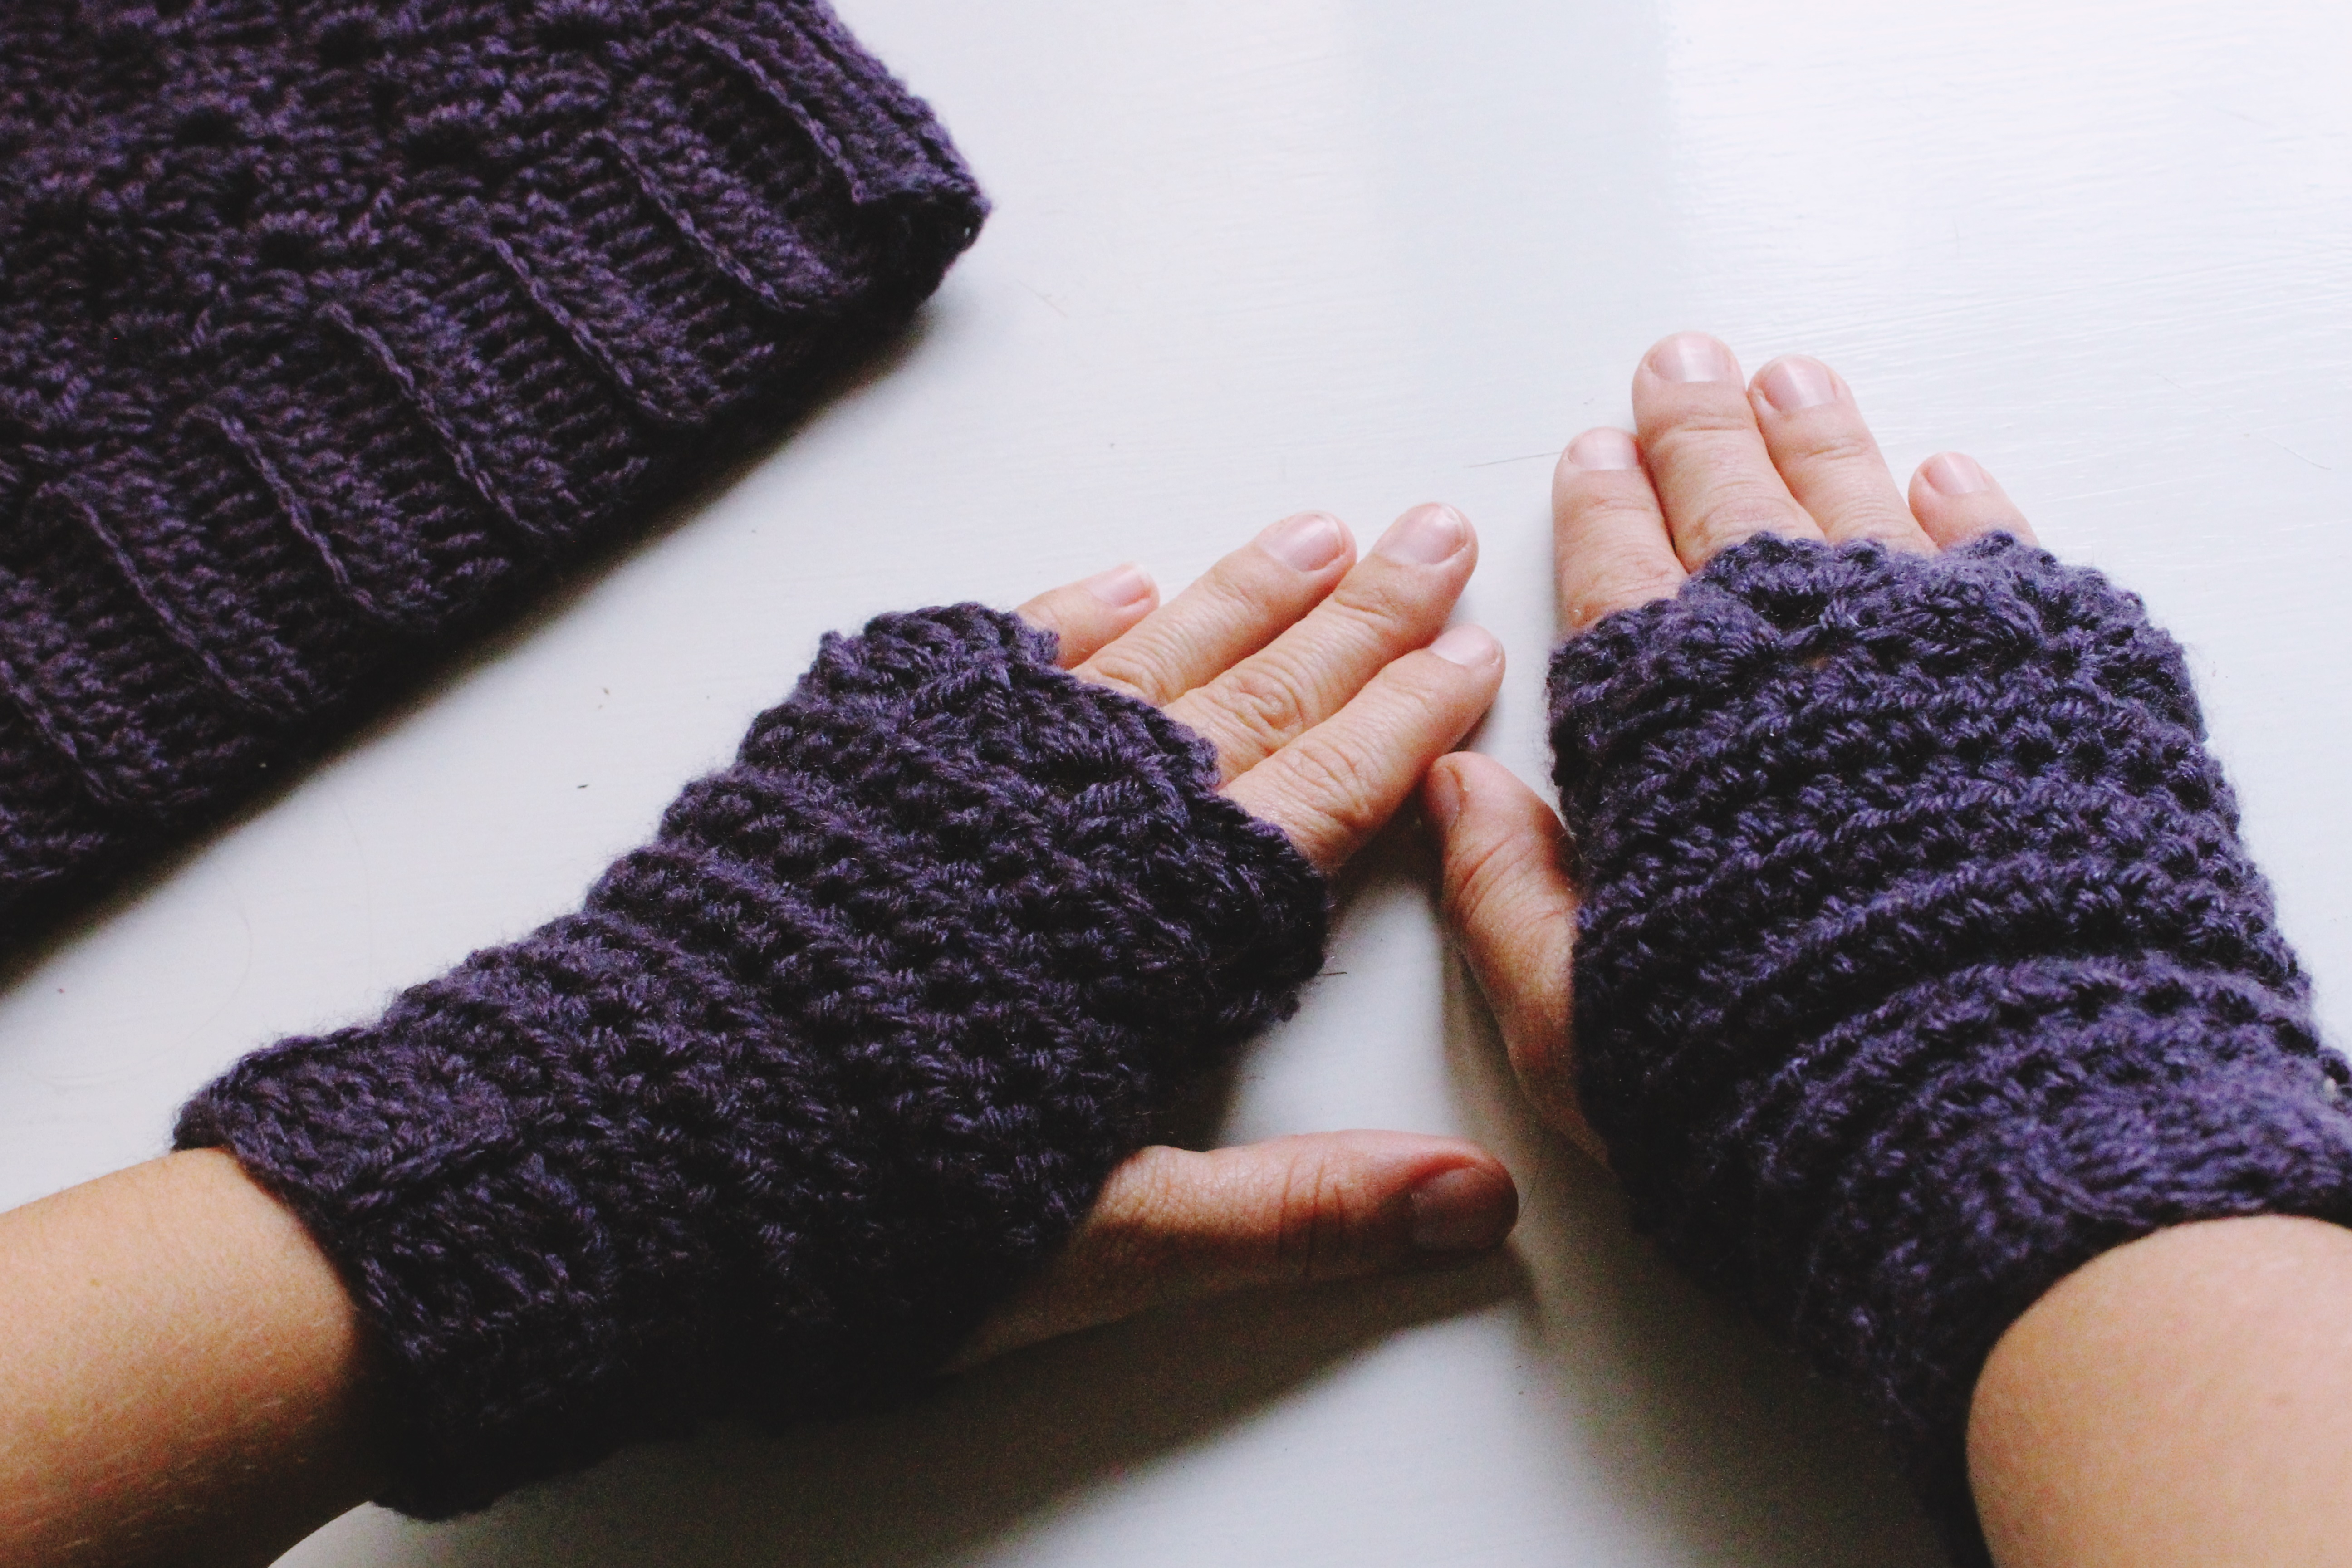 Crochet Gloves Pattern With Fingers Free Crochet Fingerless Gloves Pattern